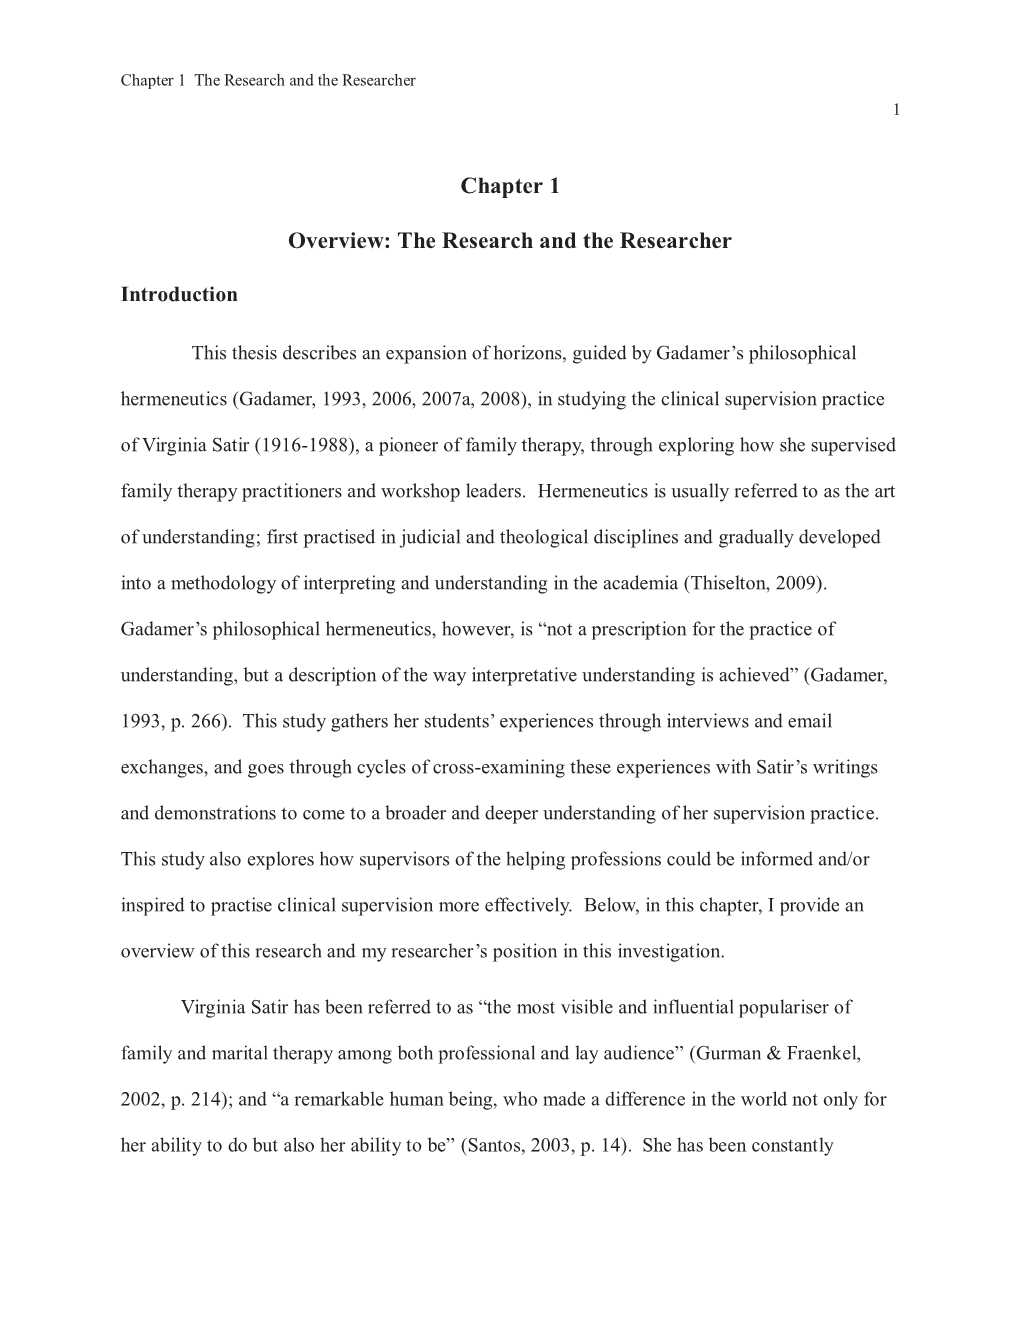 Chapter 1 Overview: the Research and the Researcher